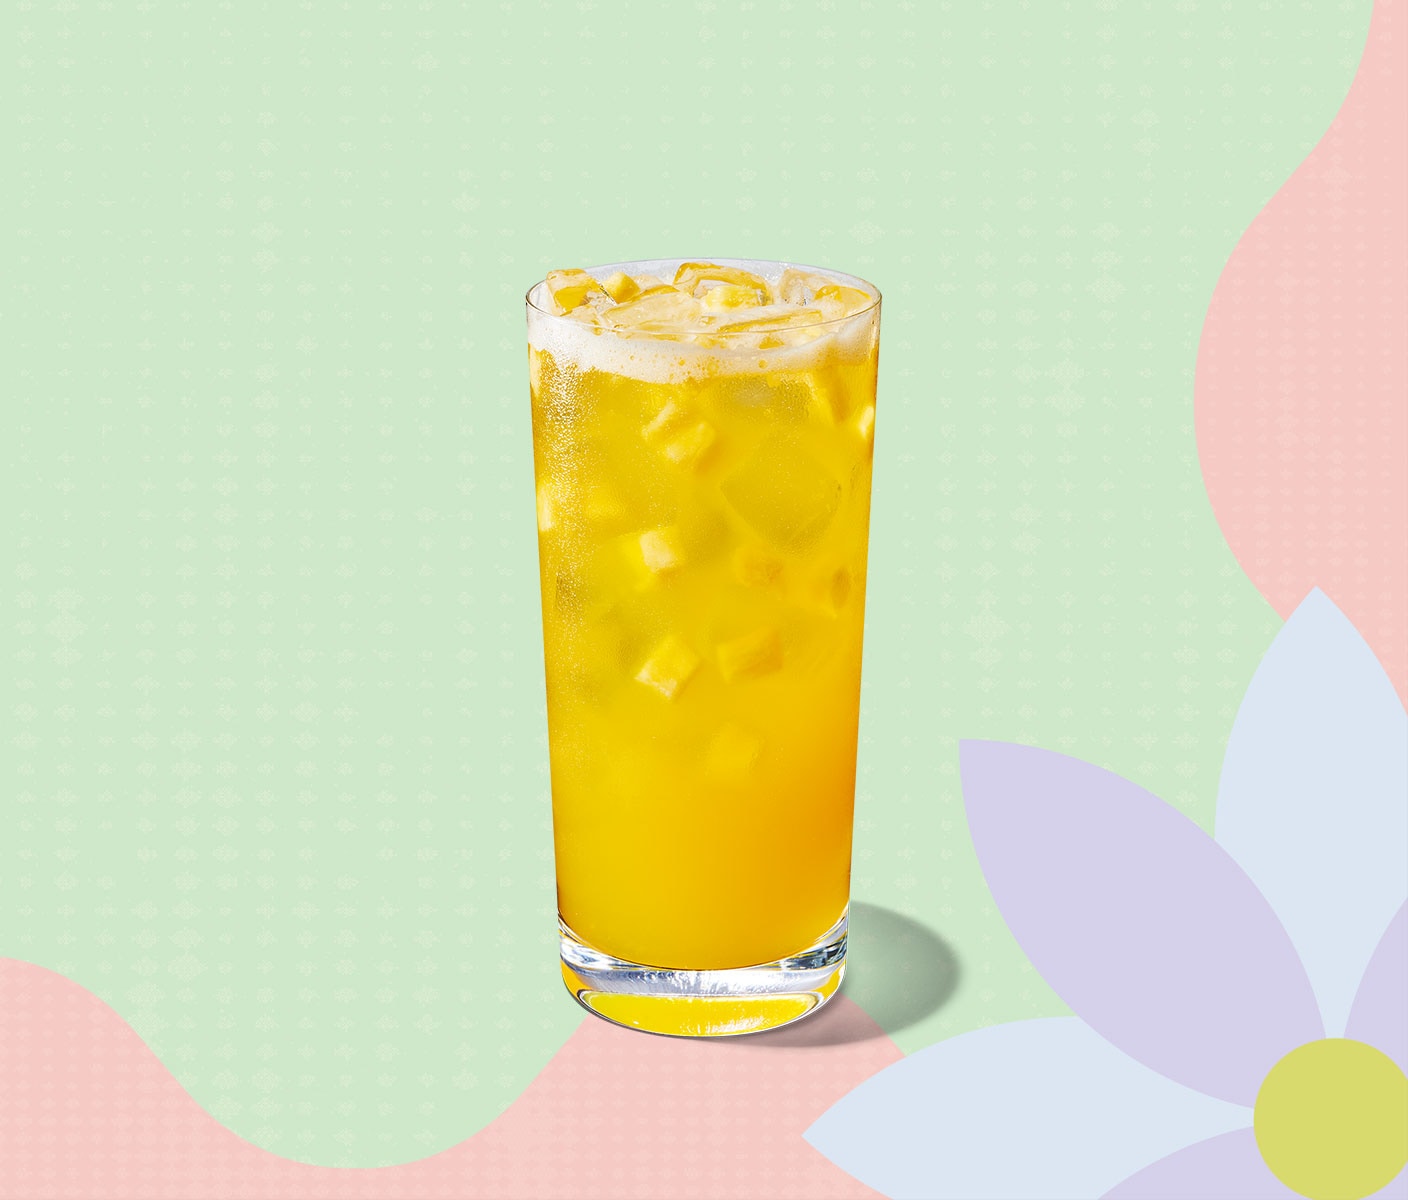 Bright-yellow iced drink with pineapple inclusions.